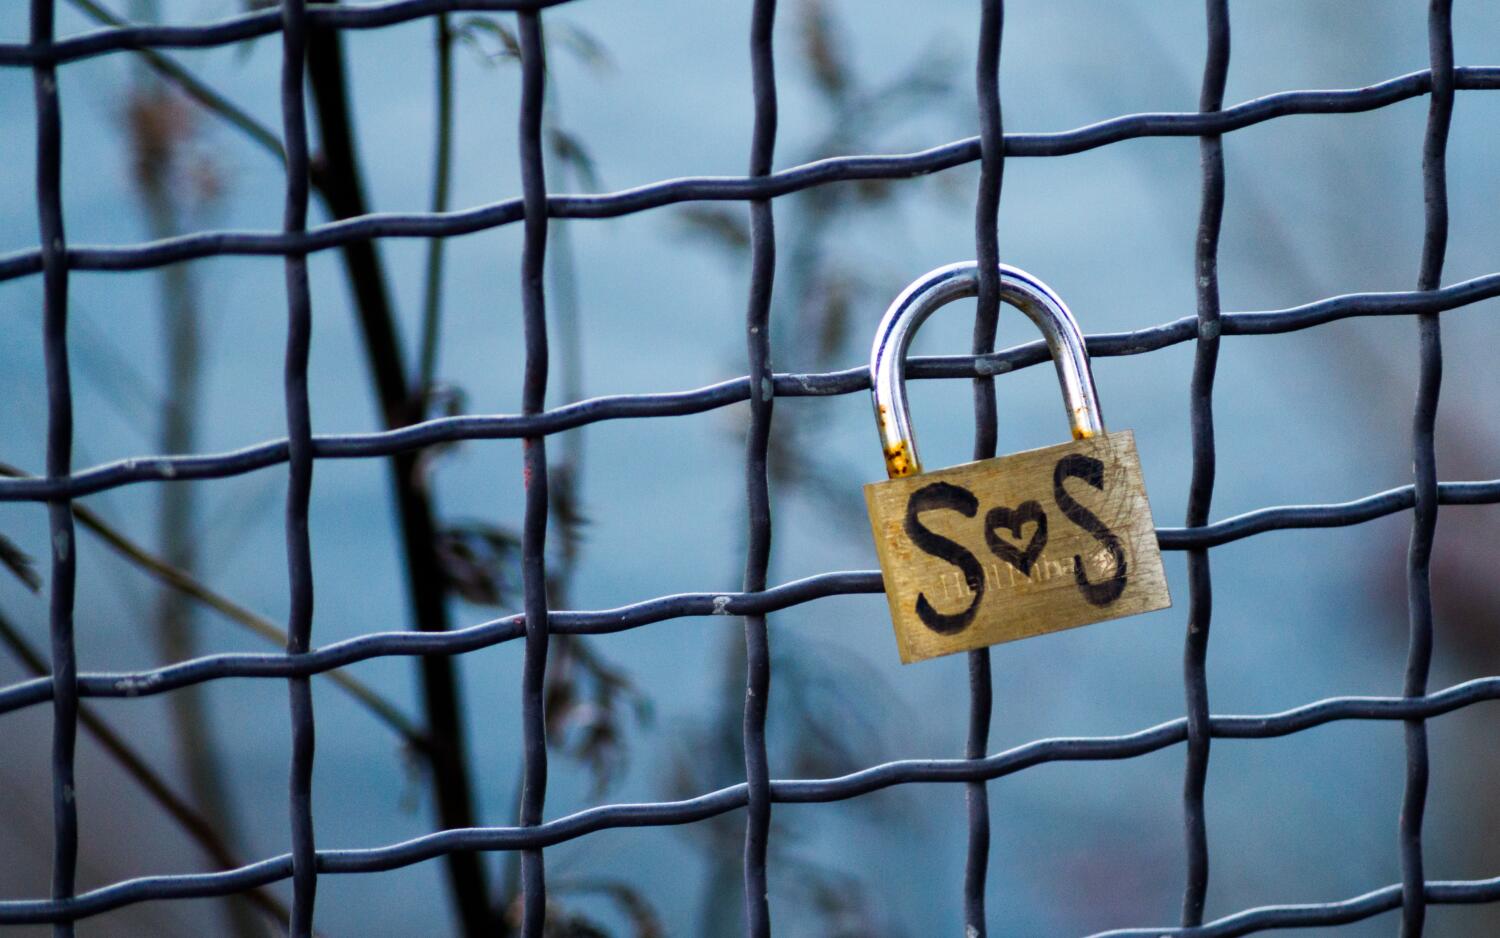 lock on fence with 'sos' reference that also appears as 's loves s' because a heart-shape stands in for 'o'